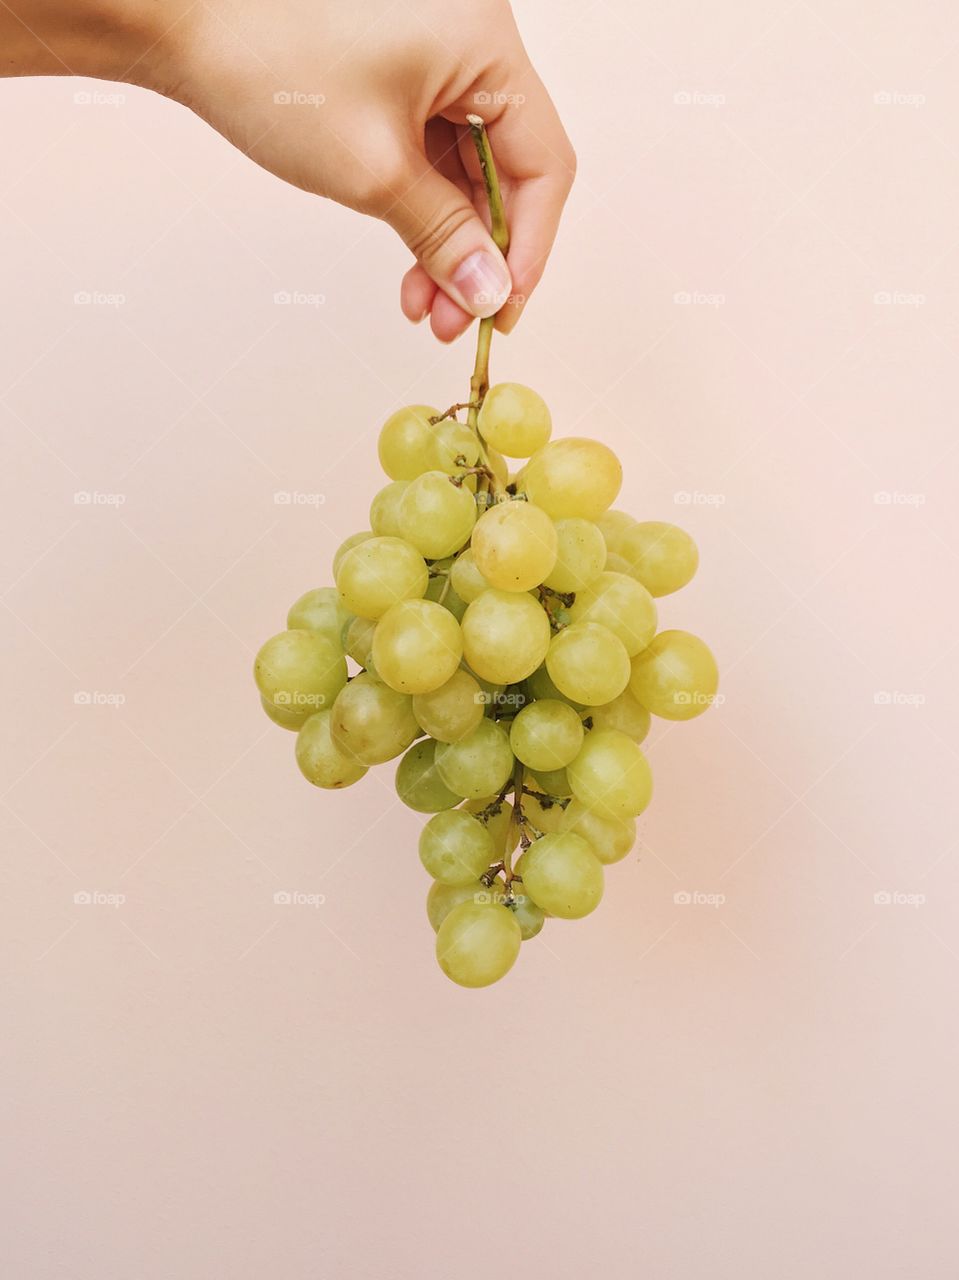 Grapes in a hand 